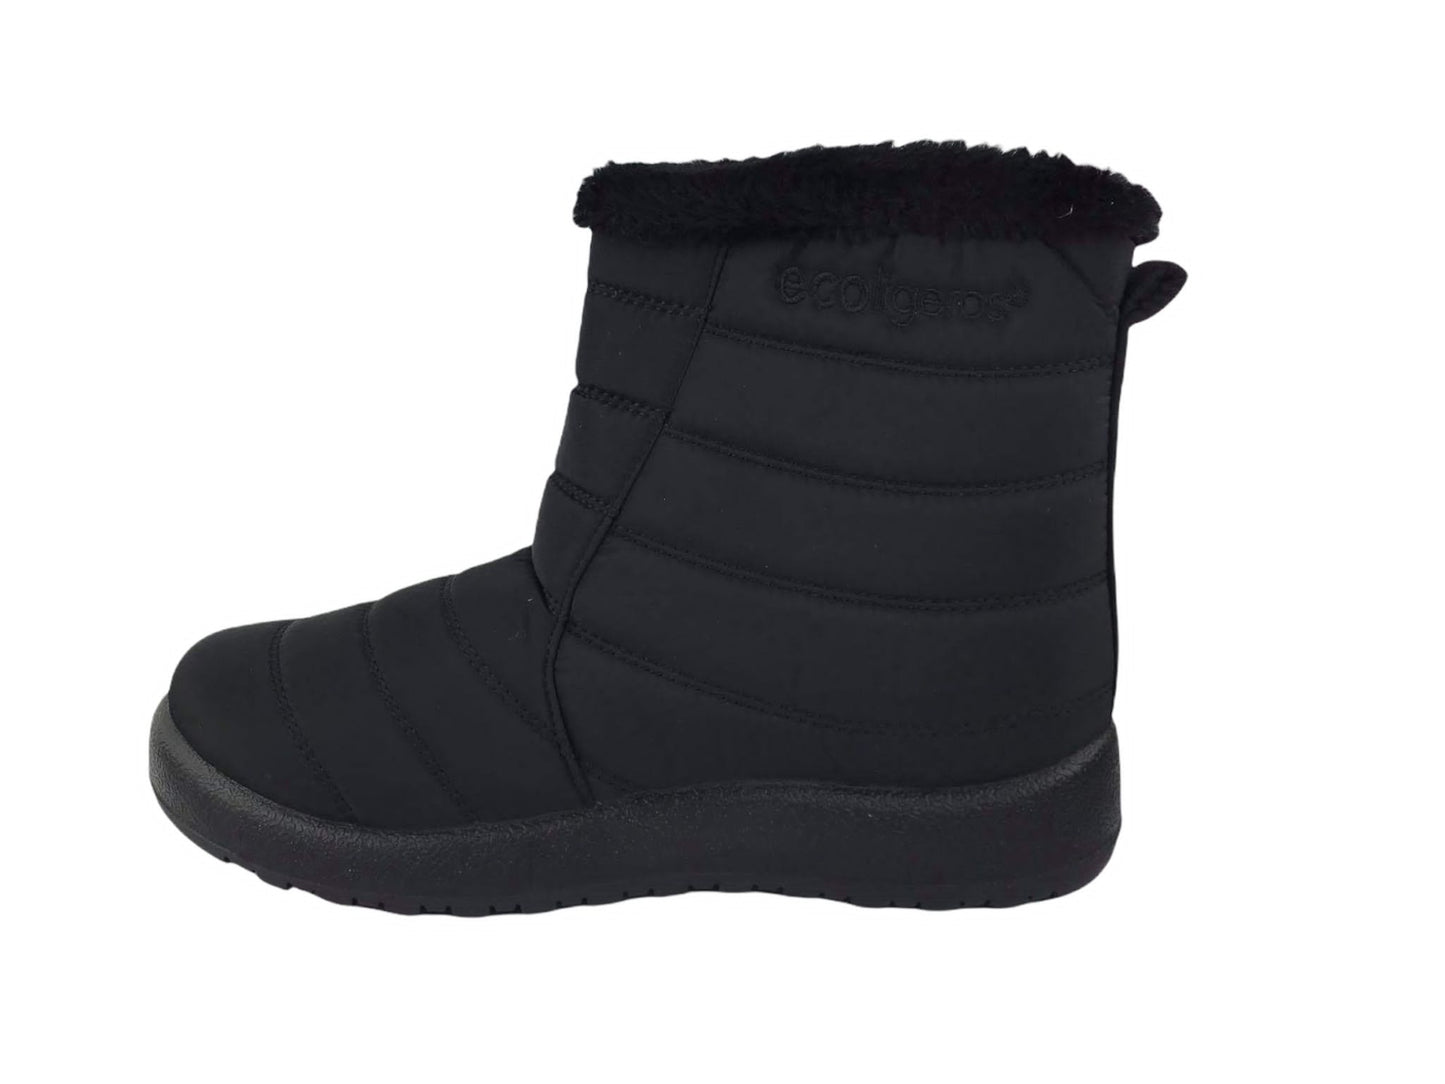 Ecolight | Women's black ankle boots with side zipper super light and Tex Filomena